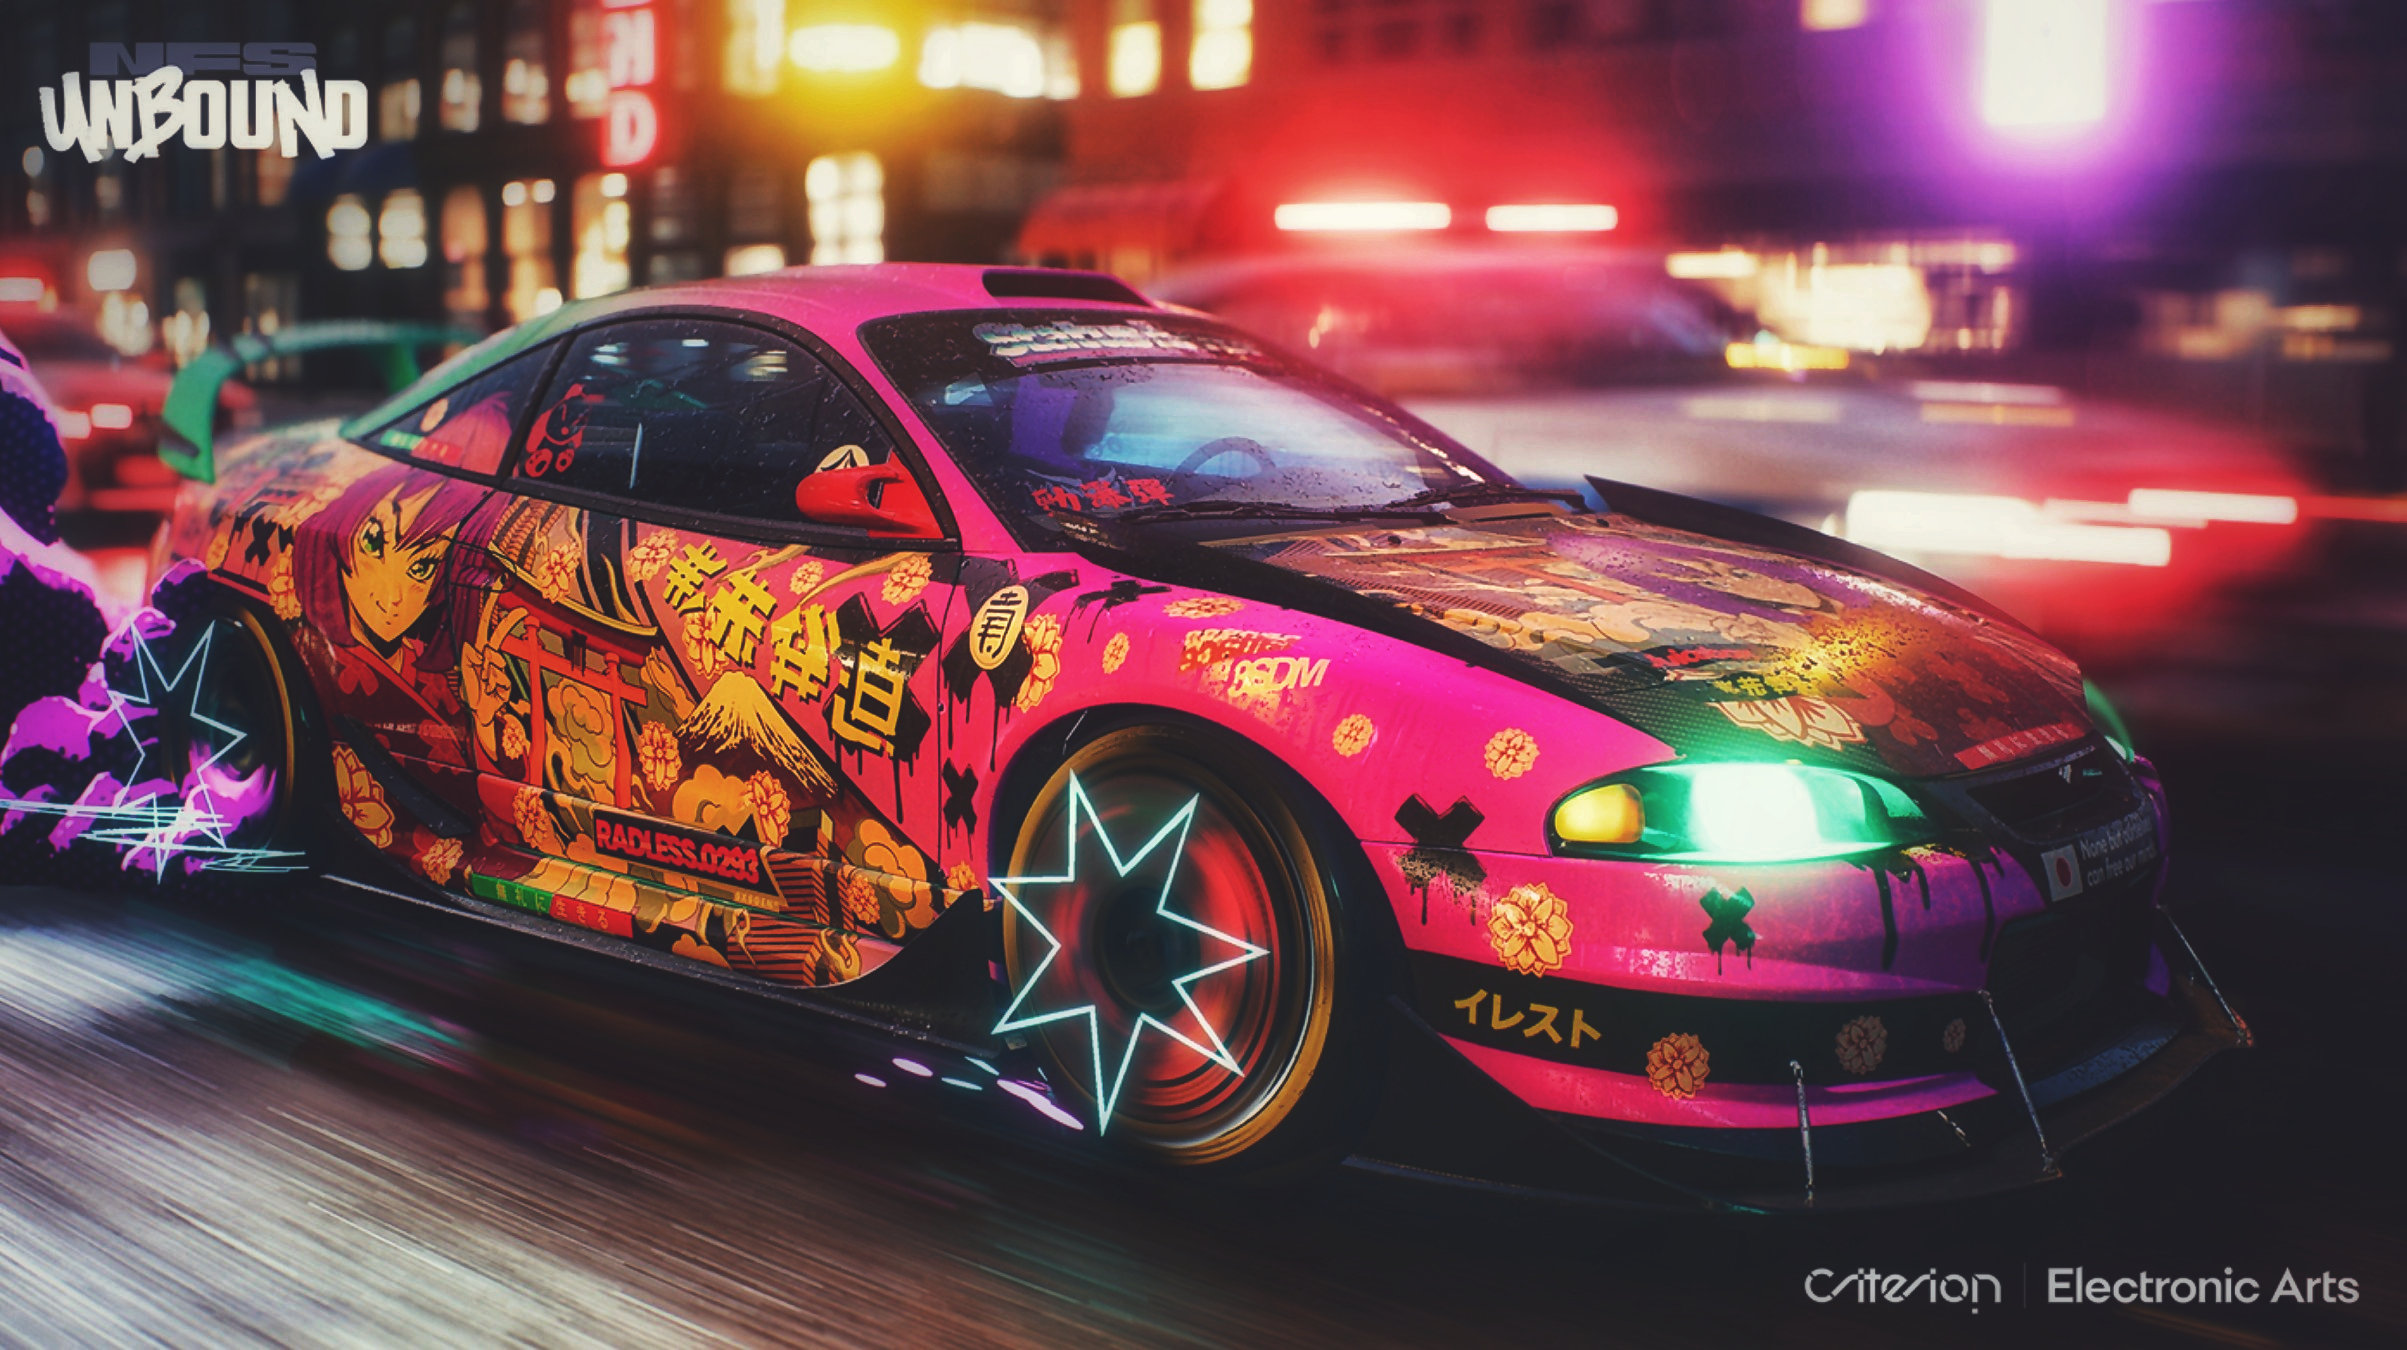 General 2407x1350 Need for speed Unbound Need for Speed video game car car anime girls Japanese video games video game art